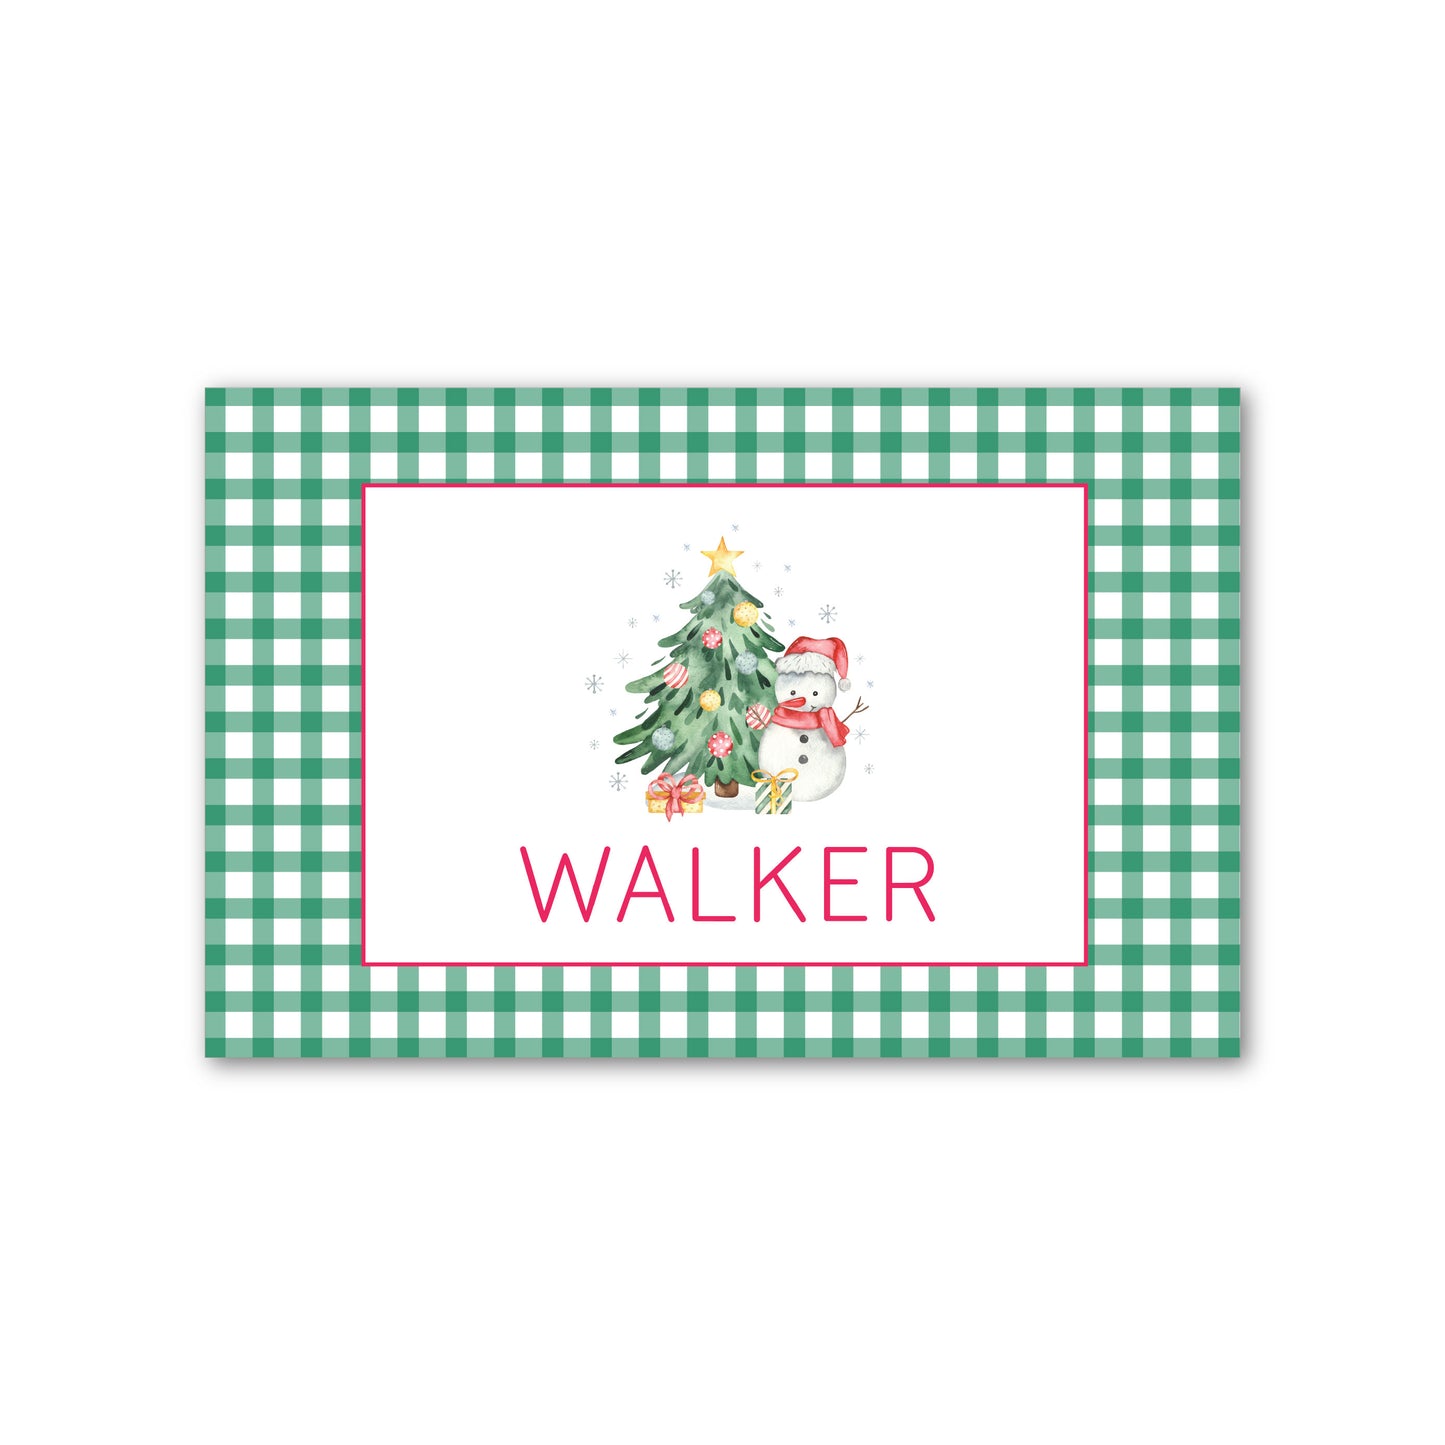 Laminated Placemat   |   Winter Tree with Snowman